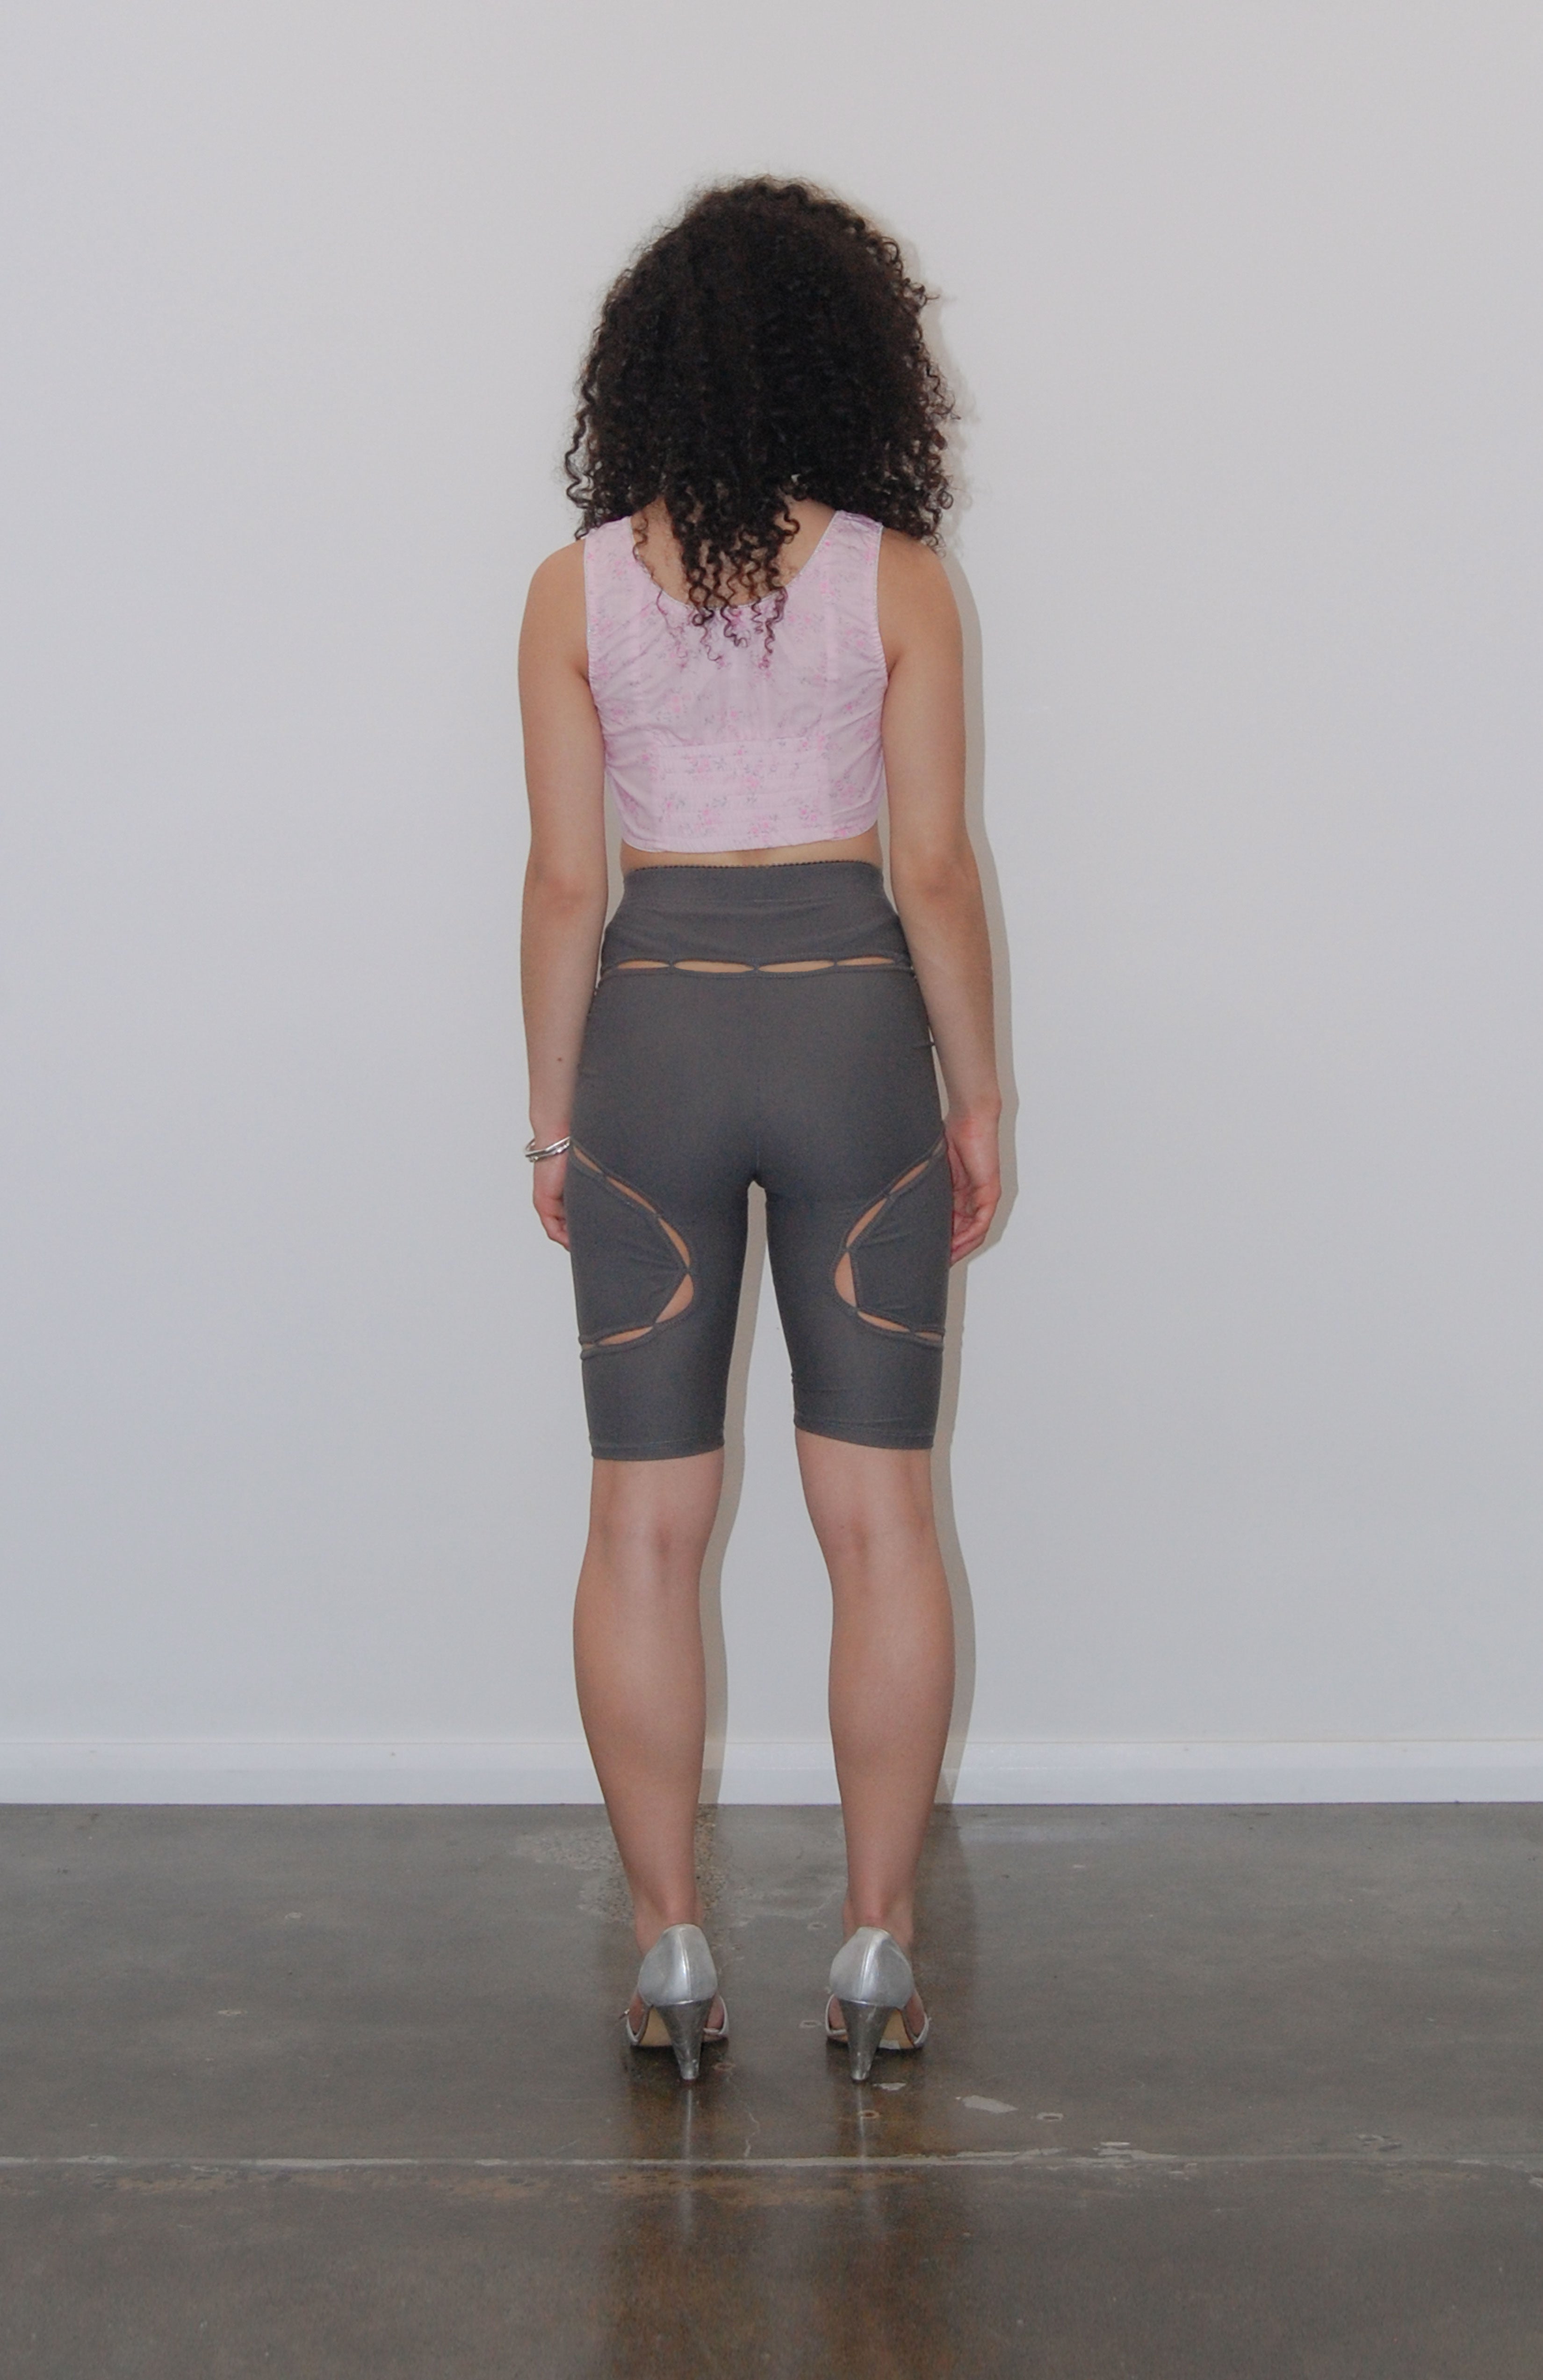 Slate high waisted bike shorts with complimentary curved Key-hole design lines that wraps around the leg and thigh. Features, Branded Maroske Peech soft elasticated waistband with scalloped hem.